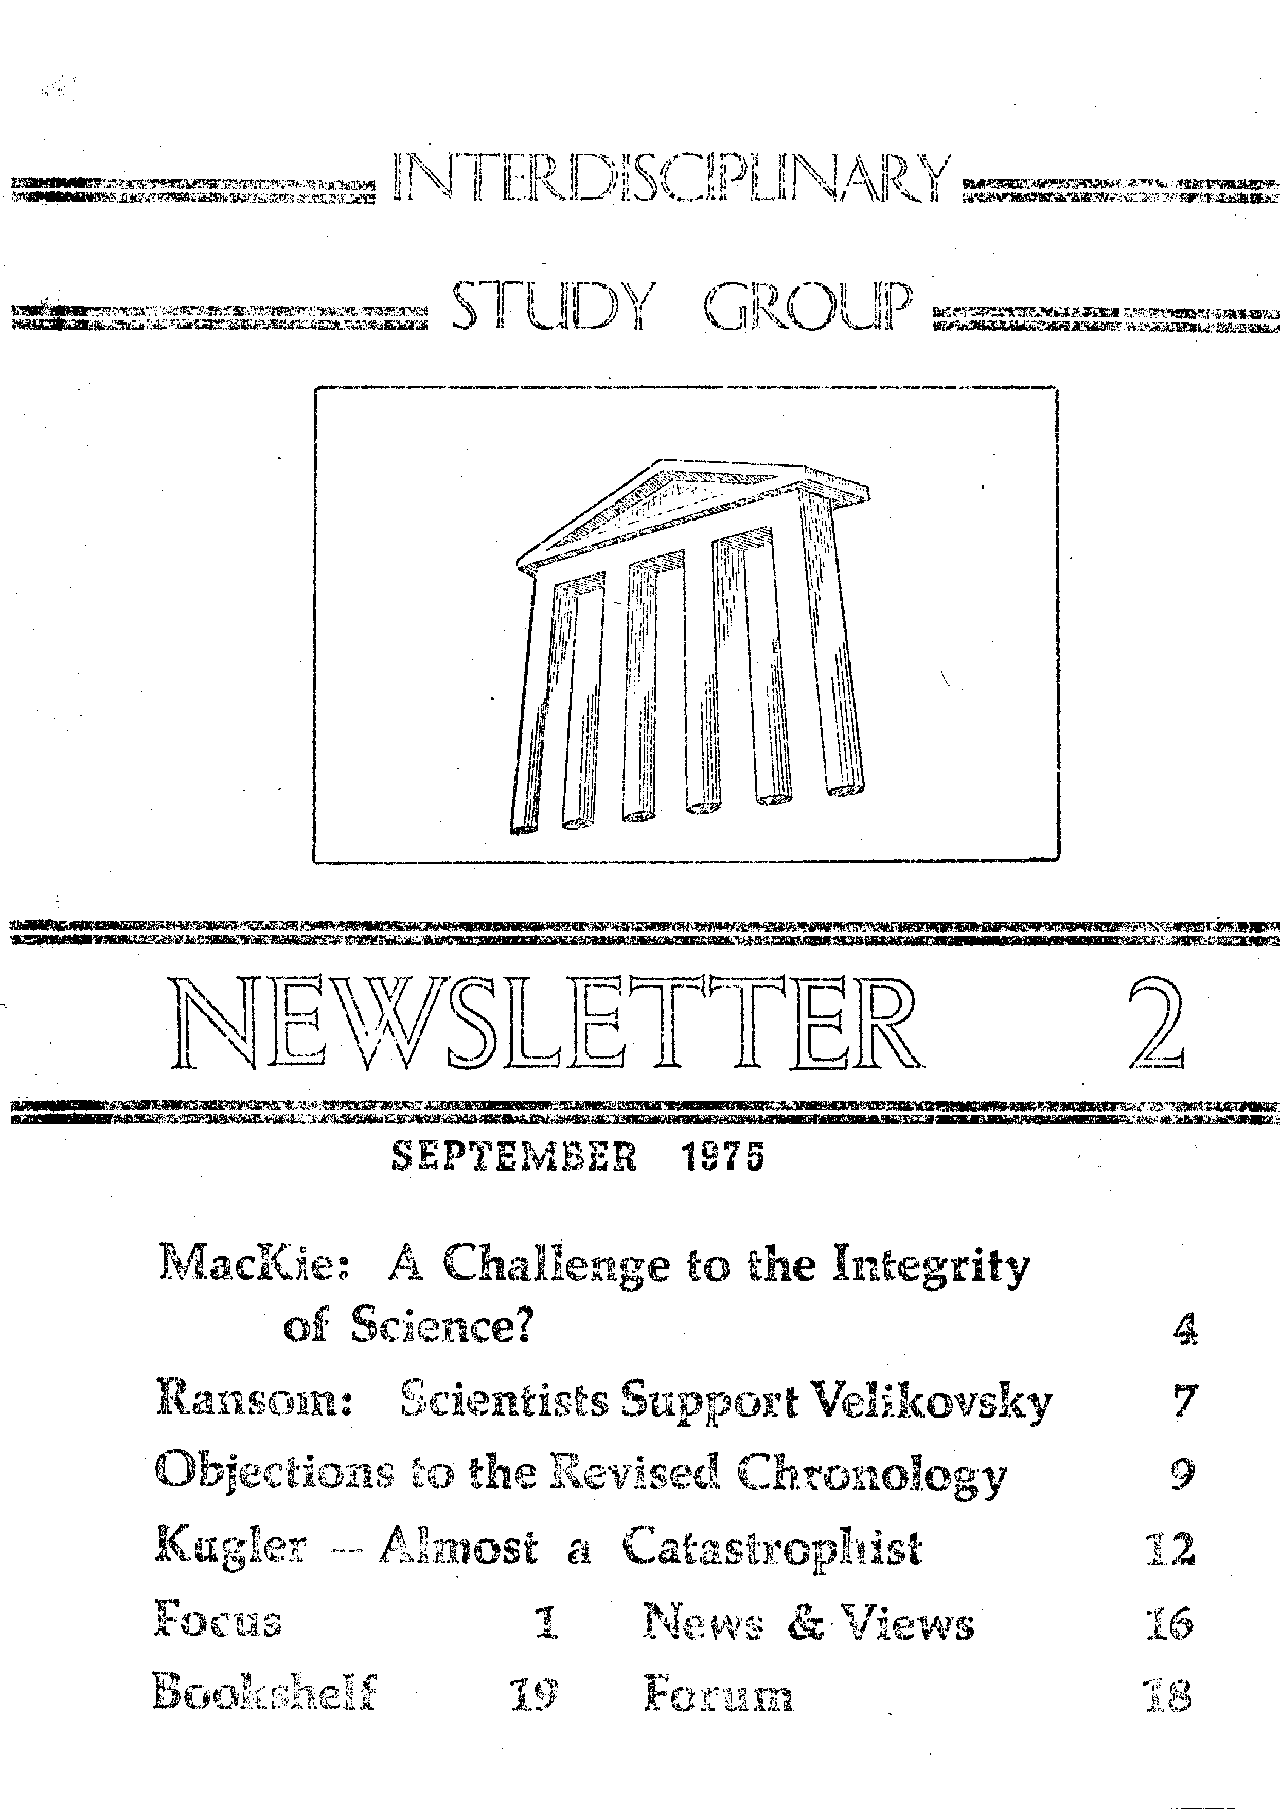 SIS Review 1975 newsletter 2 cover